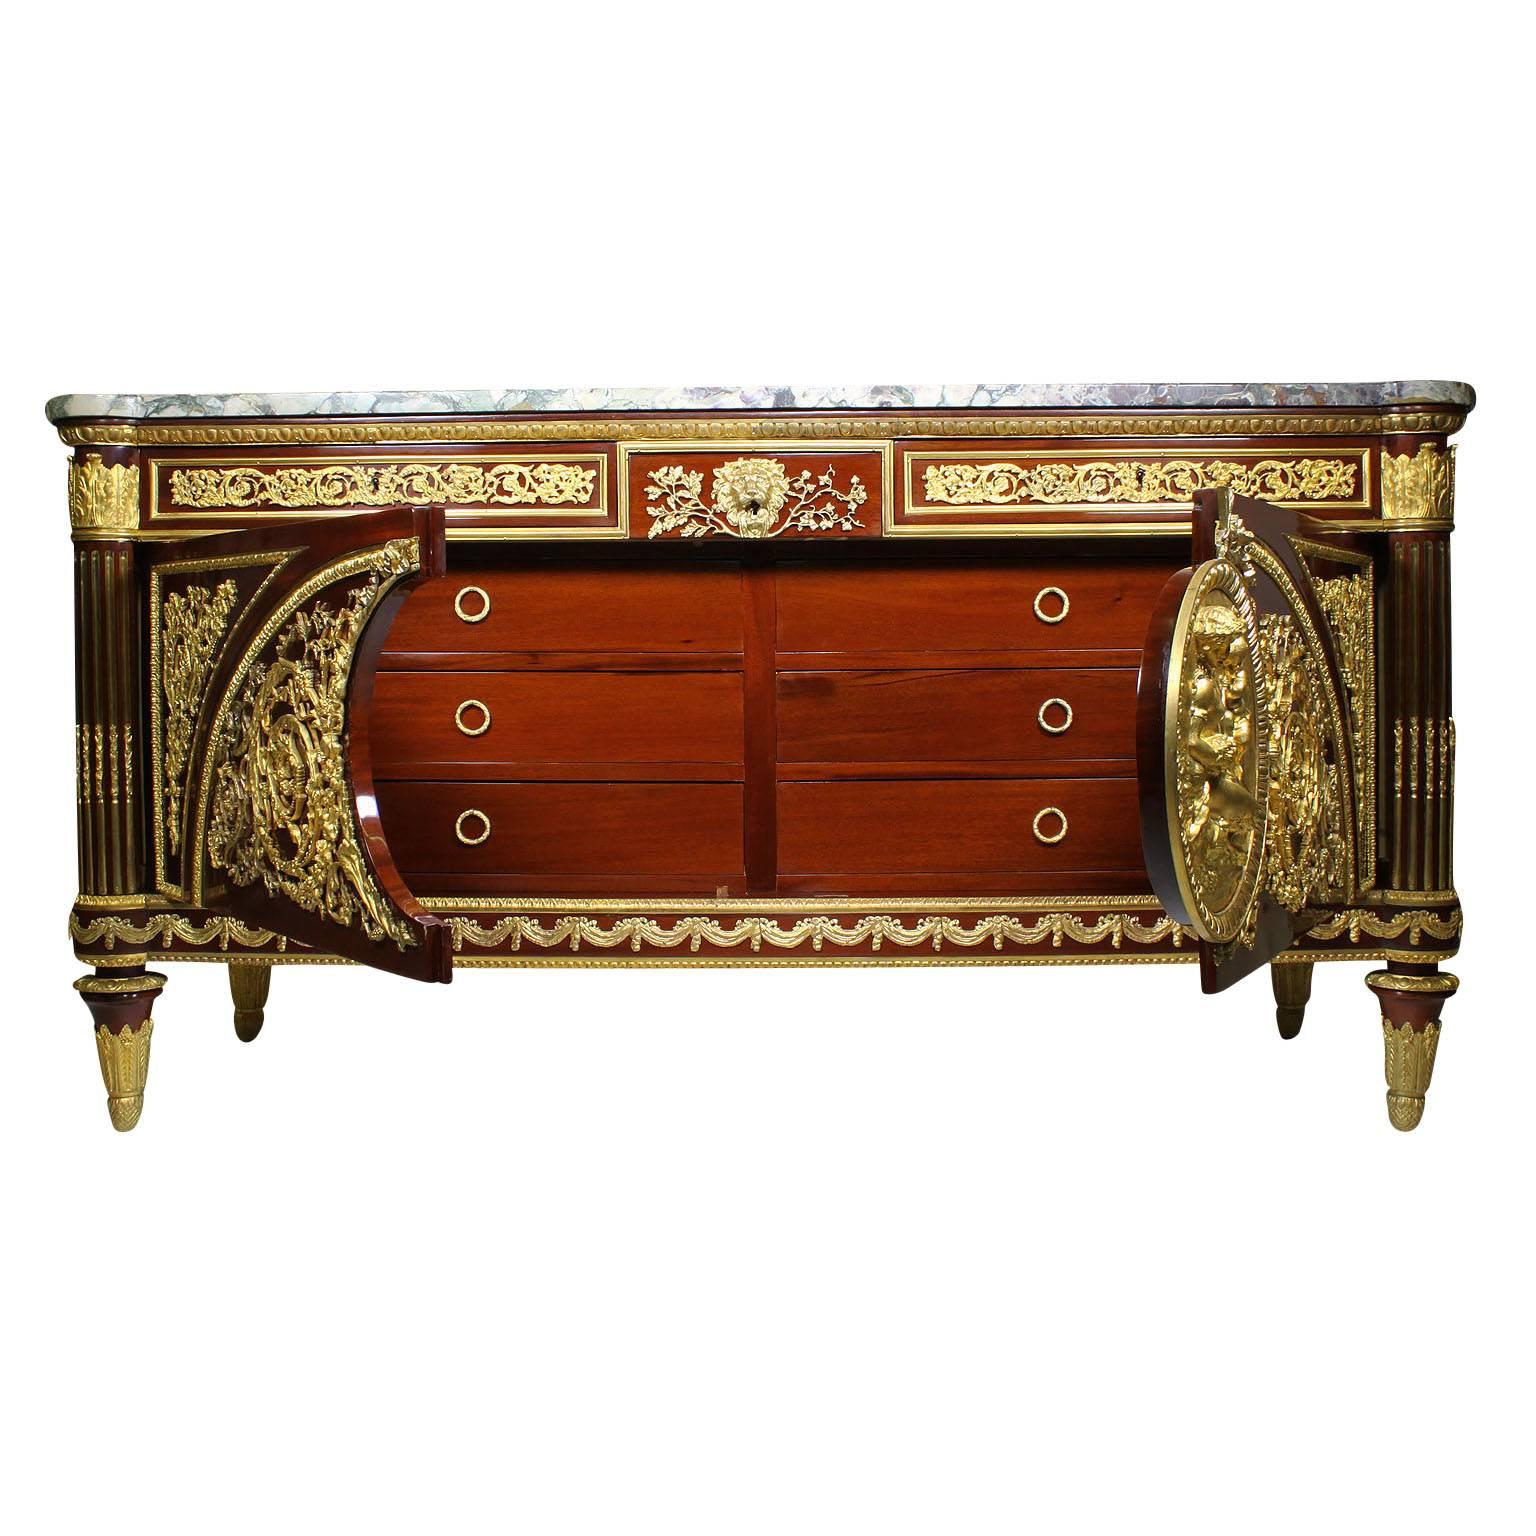 Marble French 19th-20th Century Louis XVI Style Mahogany Ormolu-Mounted Commode For Sale